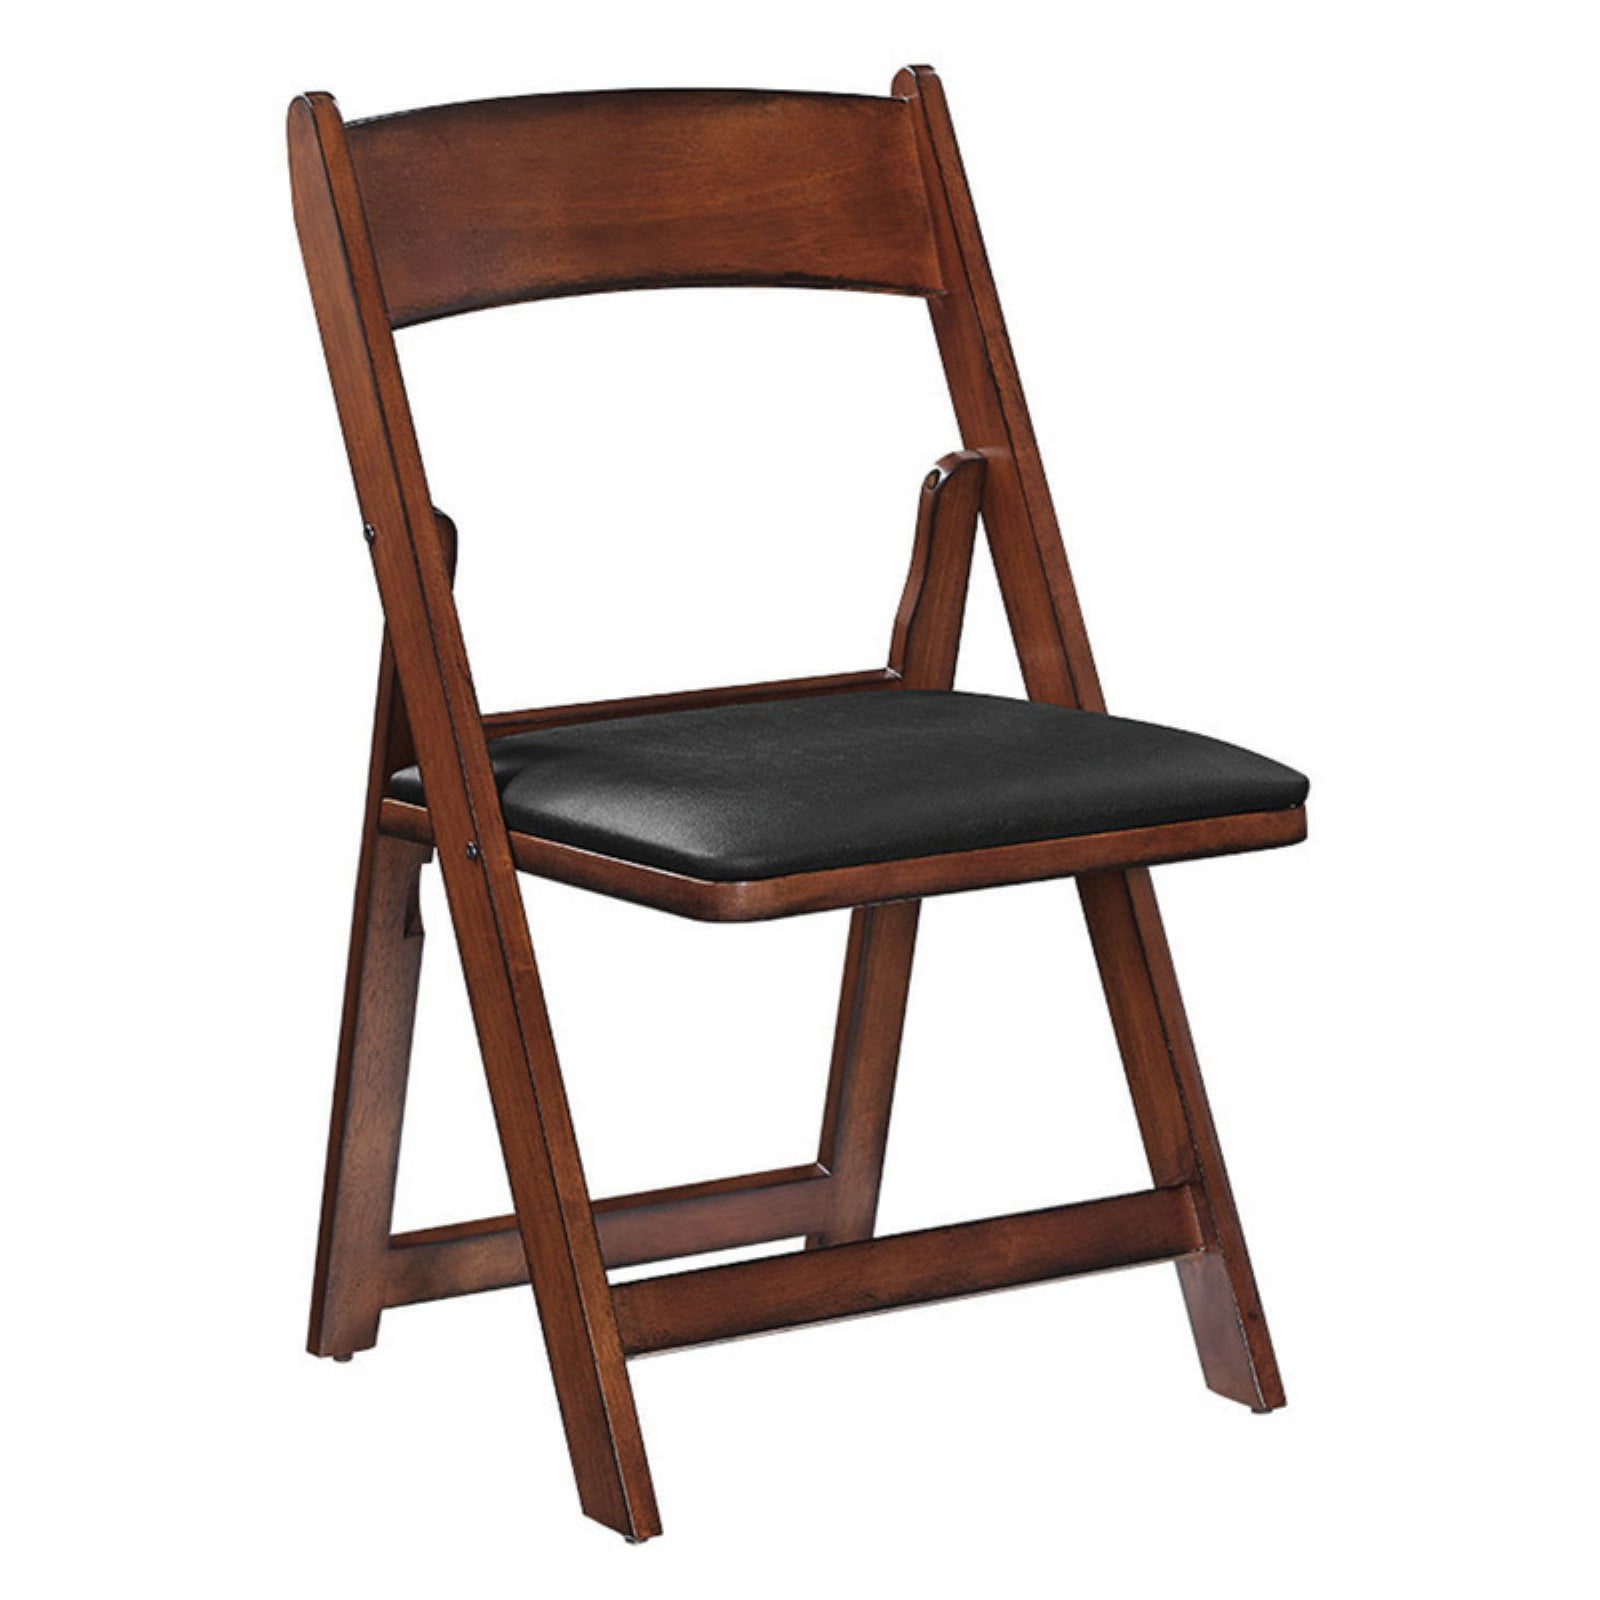 RAM Game Room Faux Leather Upholstered Folding Chair - Walmart.com